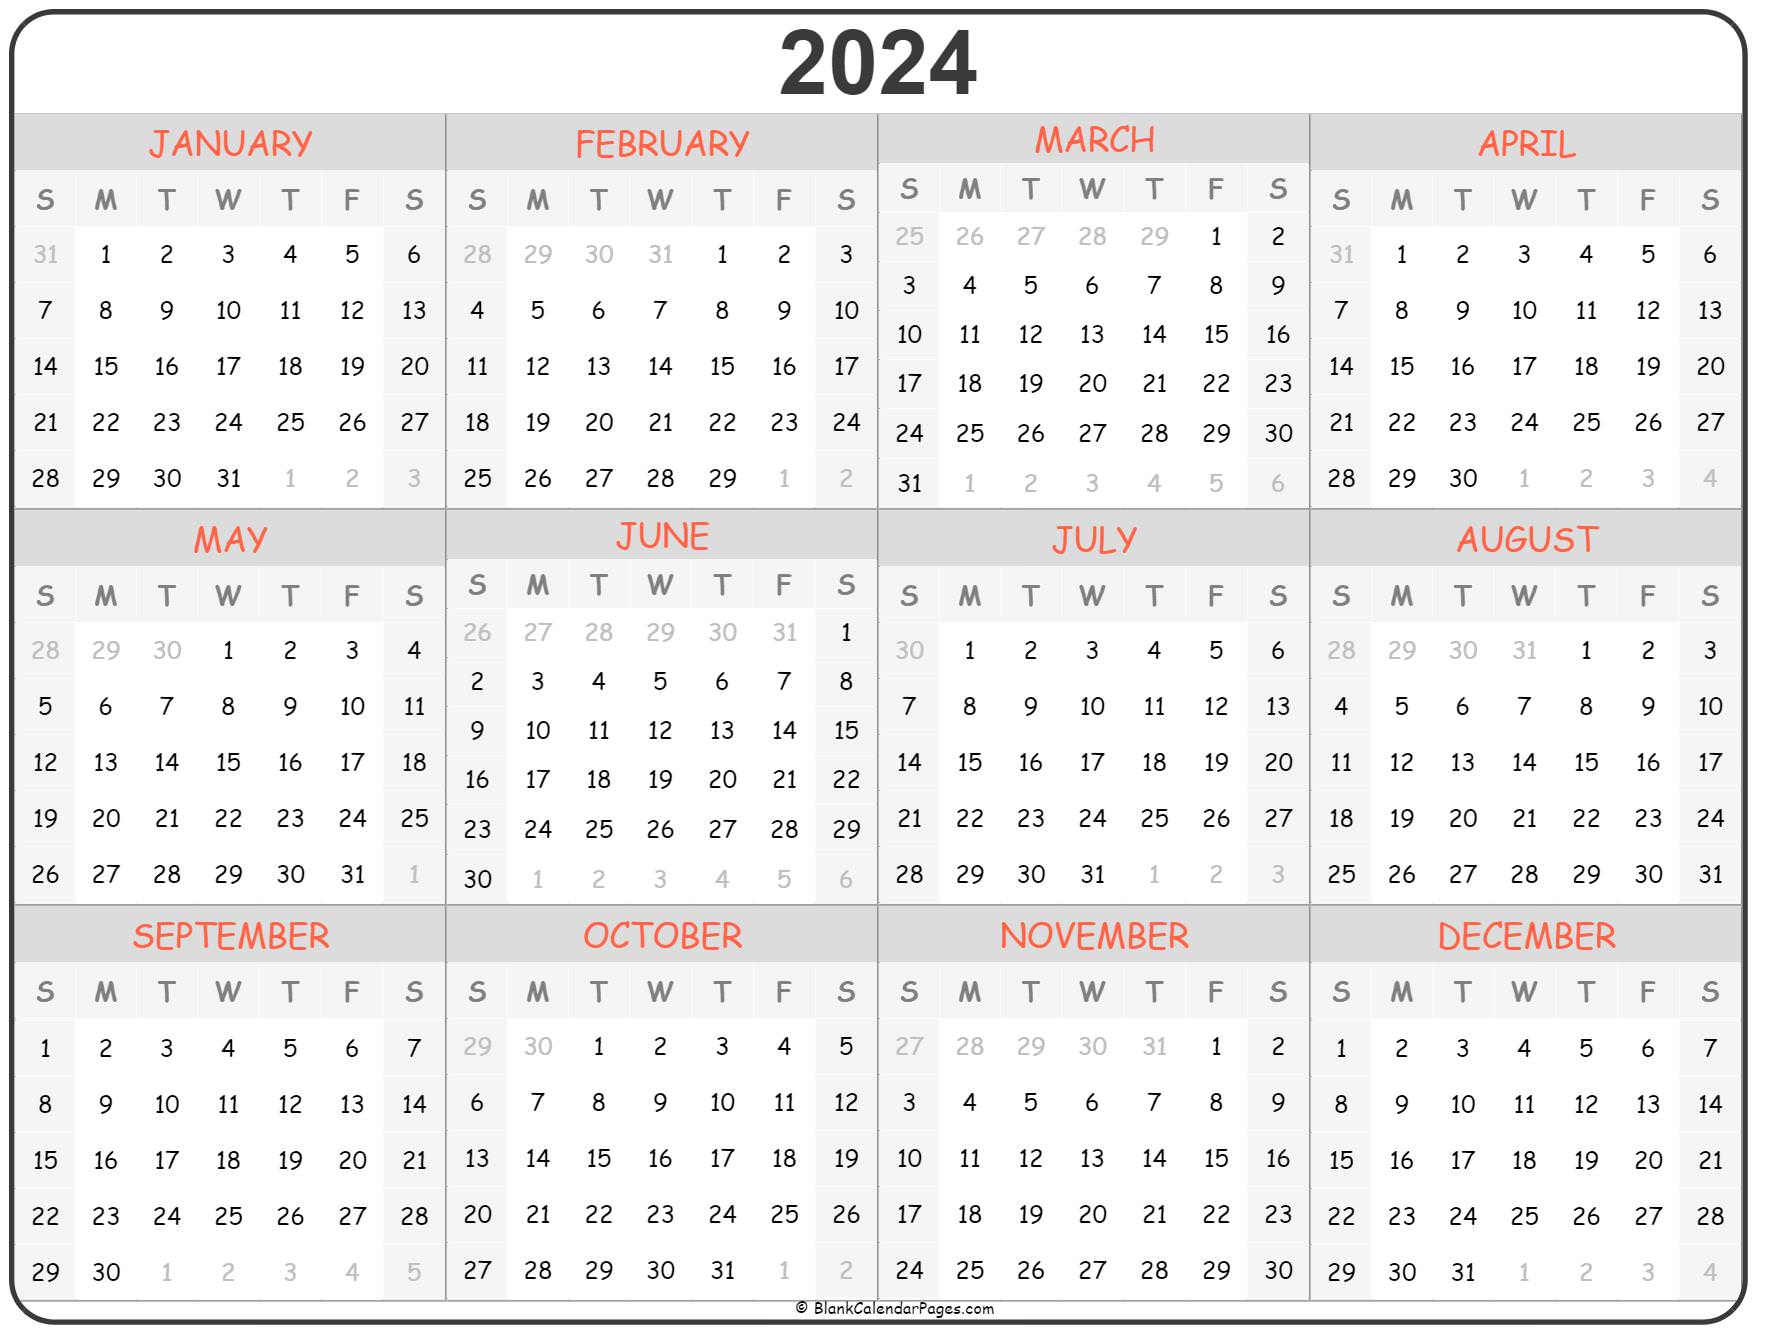 Calendar Templates And Images Year Calendar Yearly